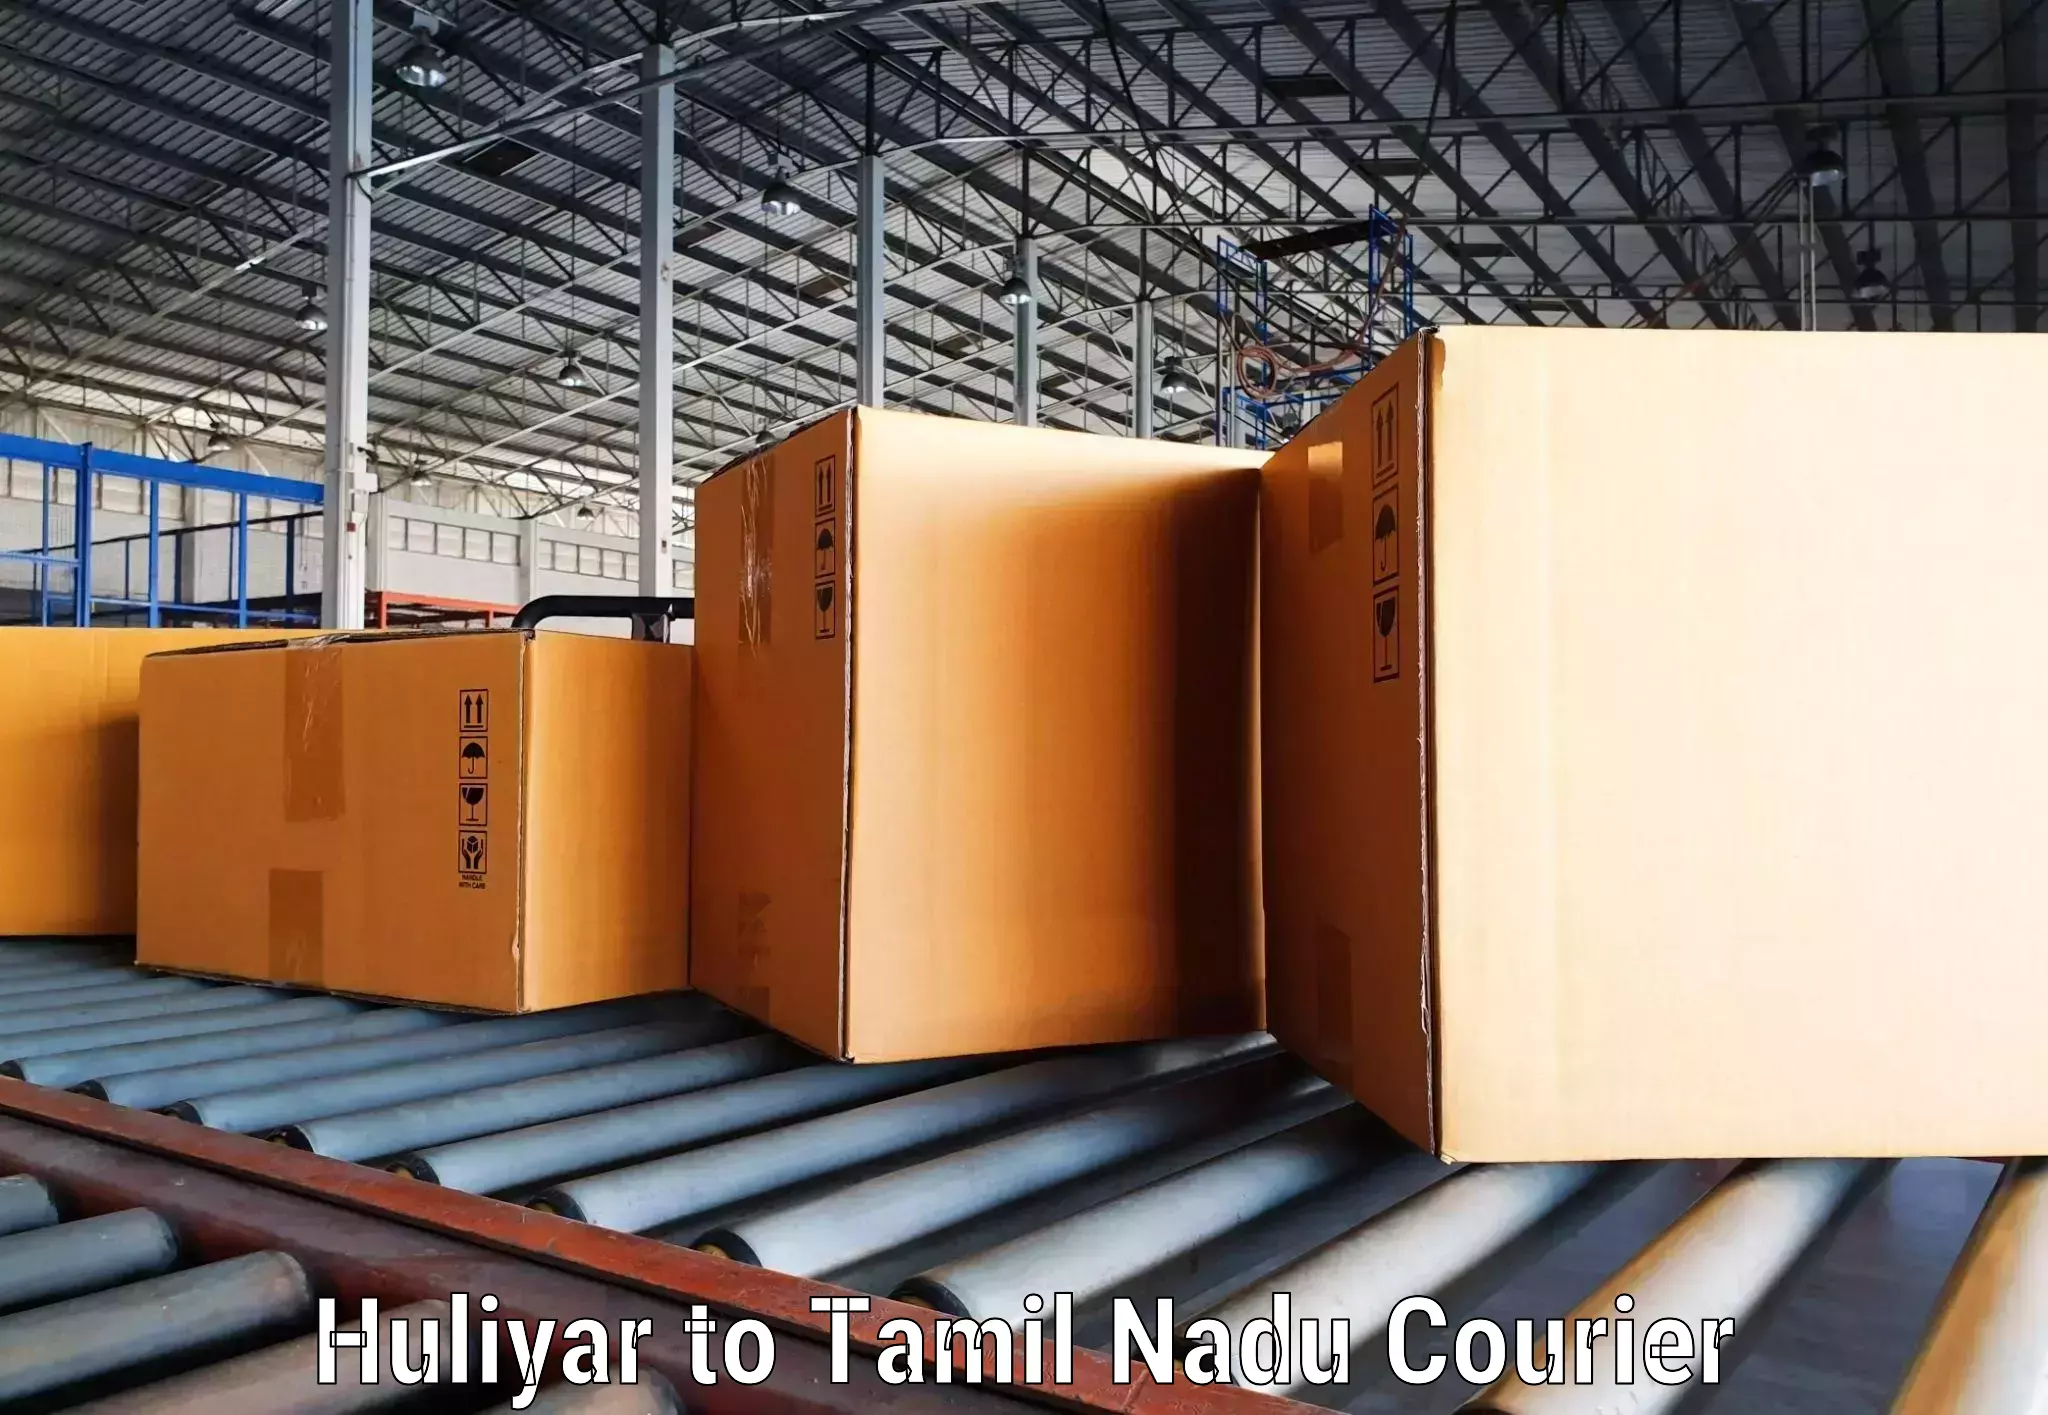 Flexible delivery schedules in Huliyar to Sriperumbudur